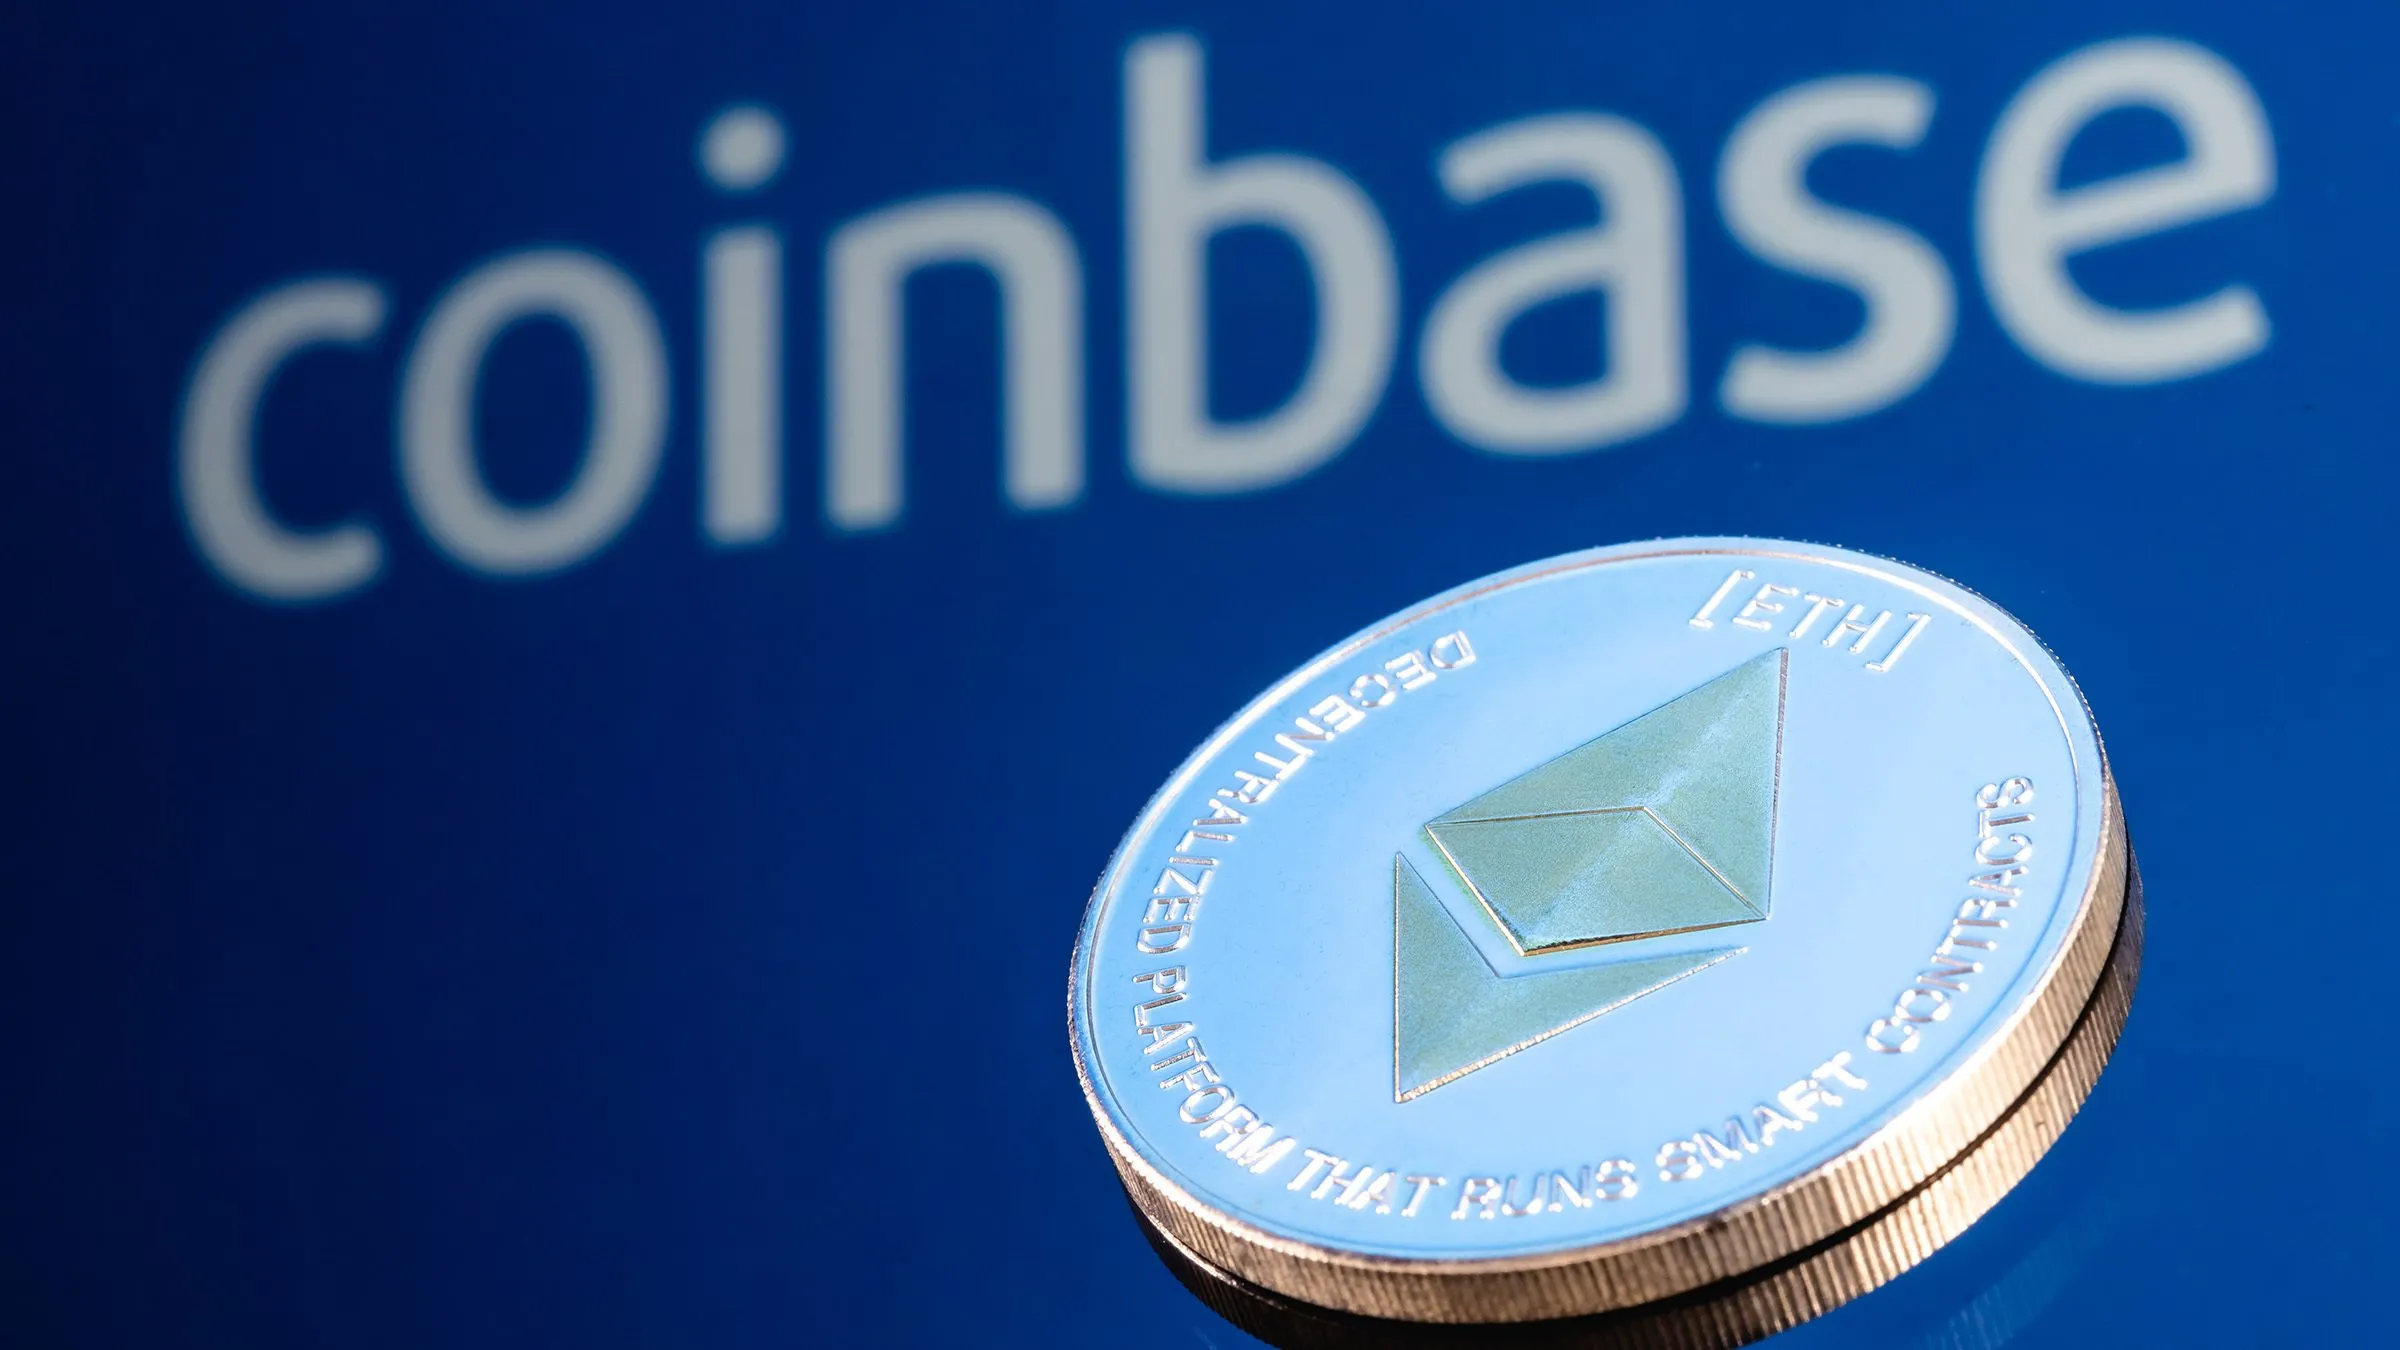 Should I Stake Ethereum on Coinbase? | CoinLedger